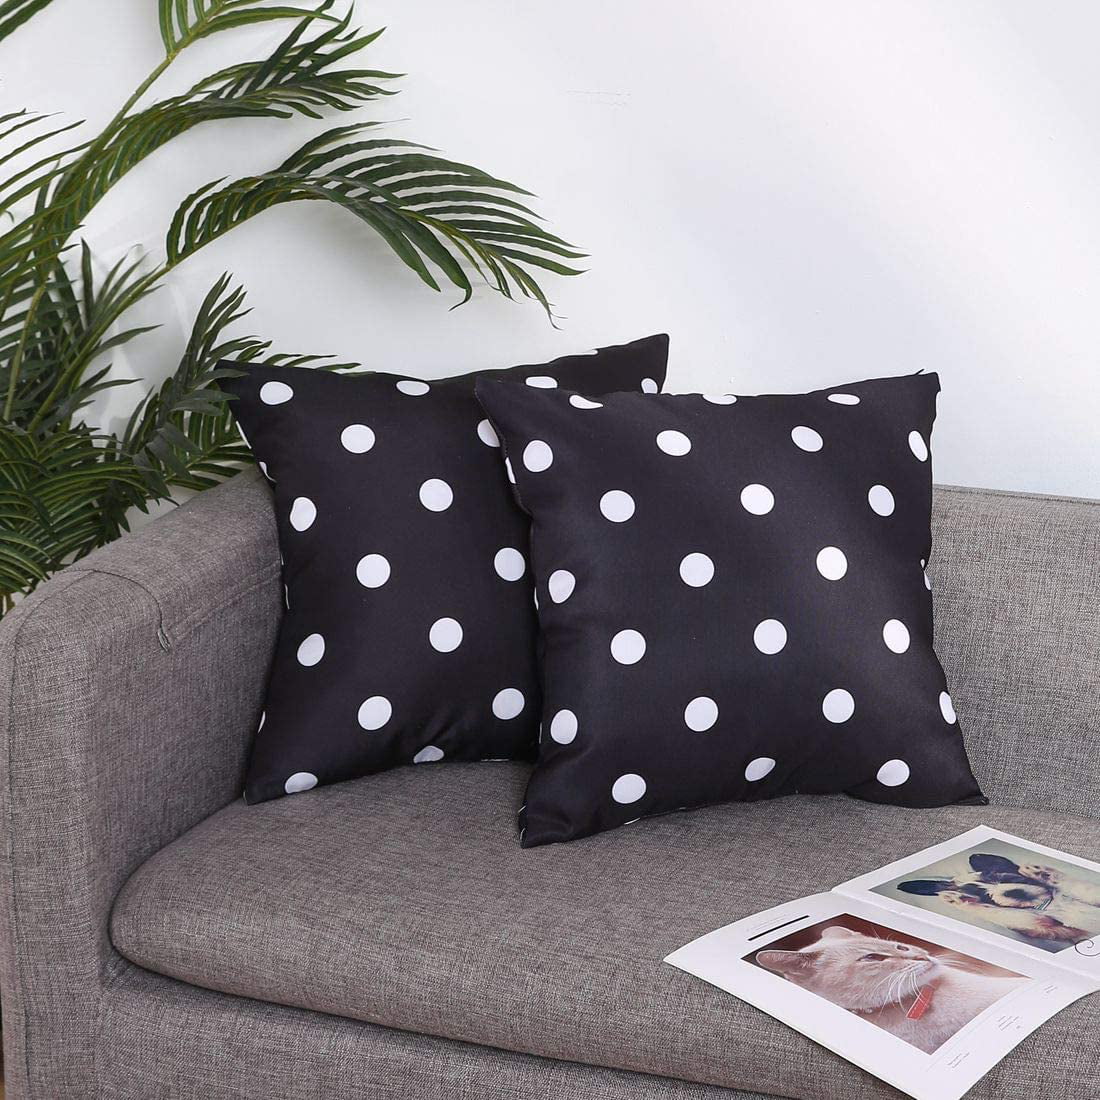 Living Room Black Polka Dot 20X20 Inches Spring Summer Poise3EHome Outdoor Throw Pillow Covers Set of 2 Waterproof Decorative Pillow Covers for Halloween Couch Patio